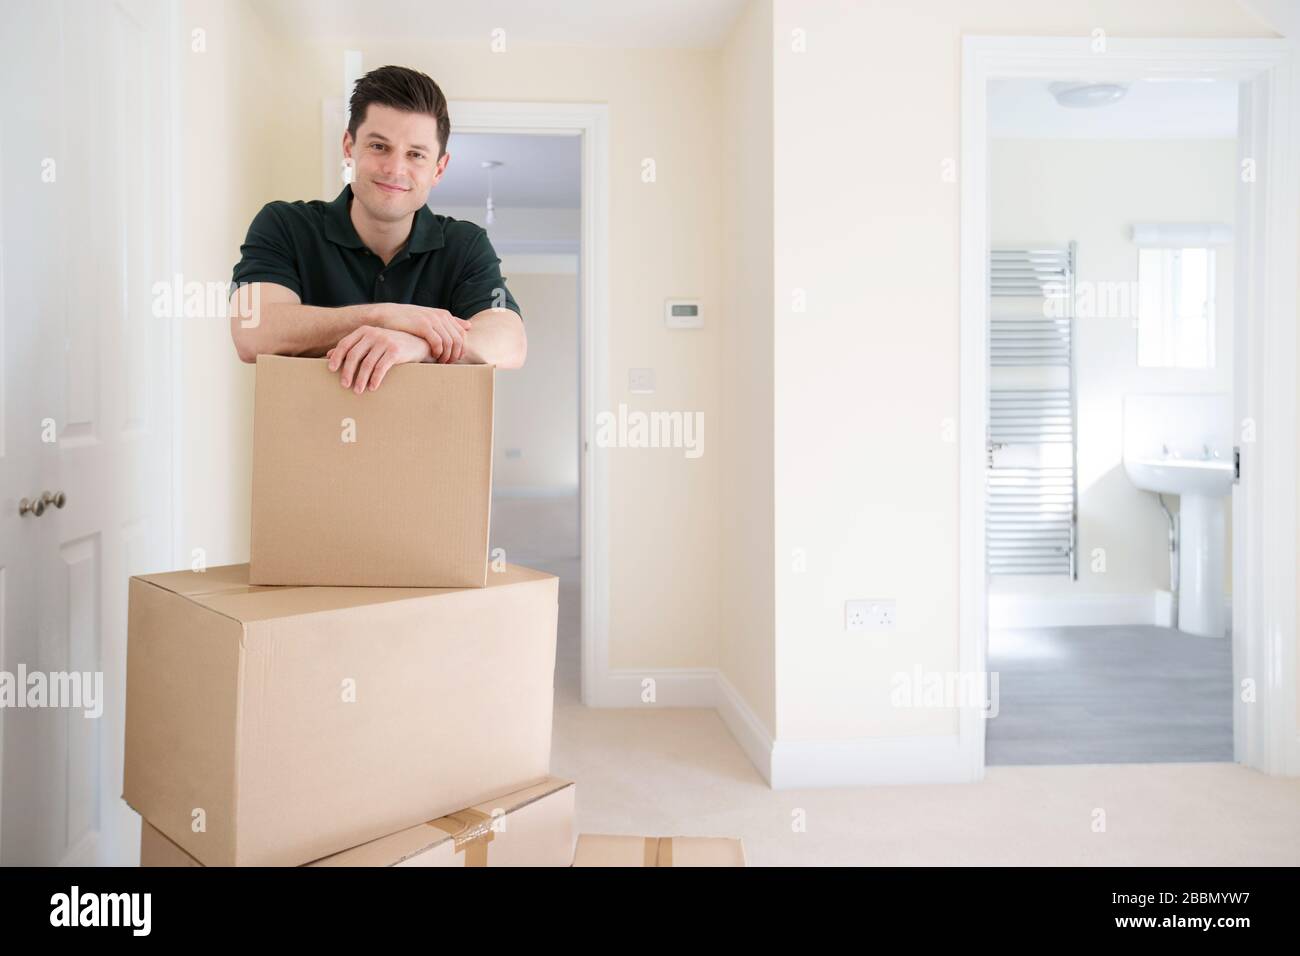 Portrait Of Removal Man Carrying Boxes Into New Home On Moving Day Stock Photo